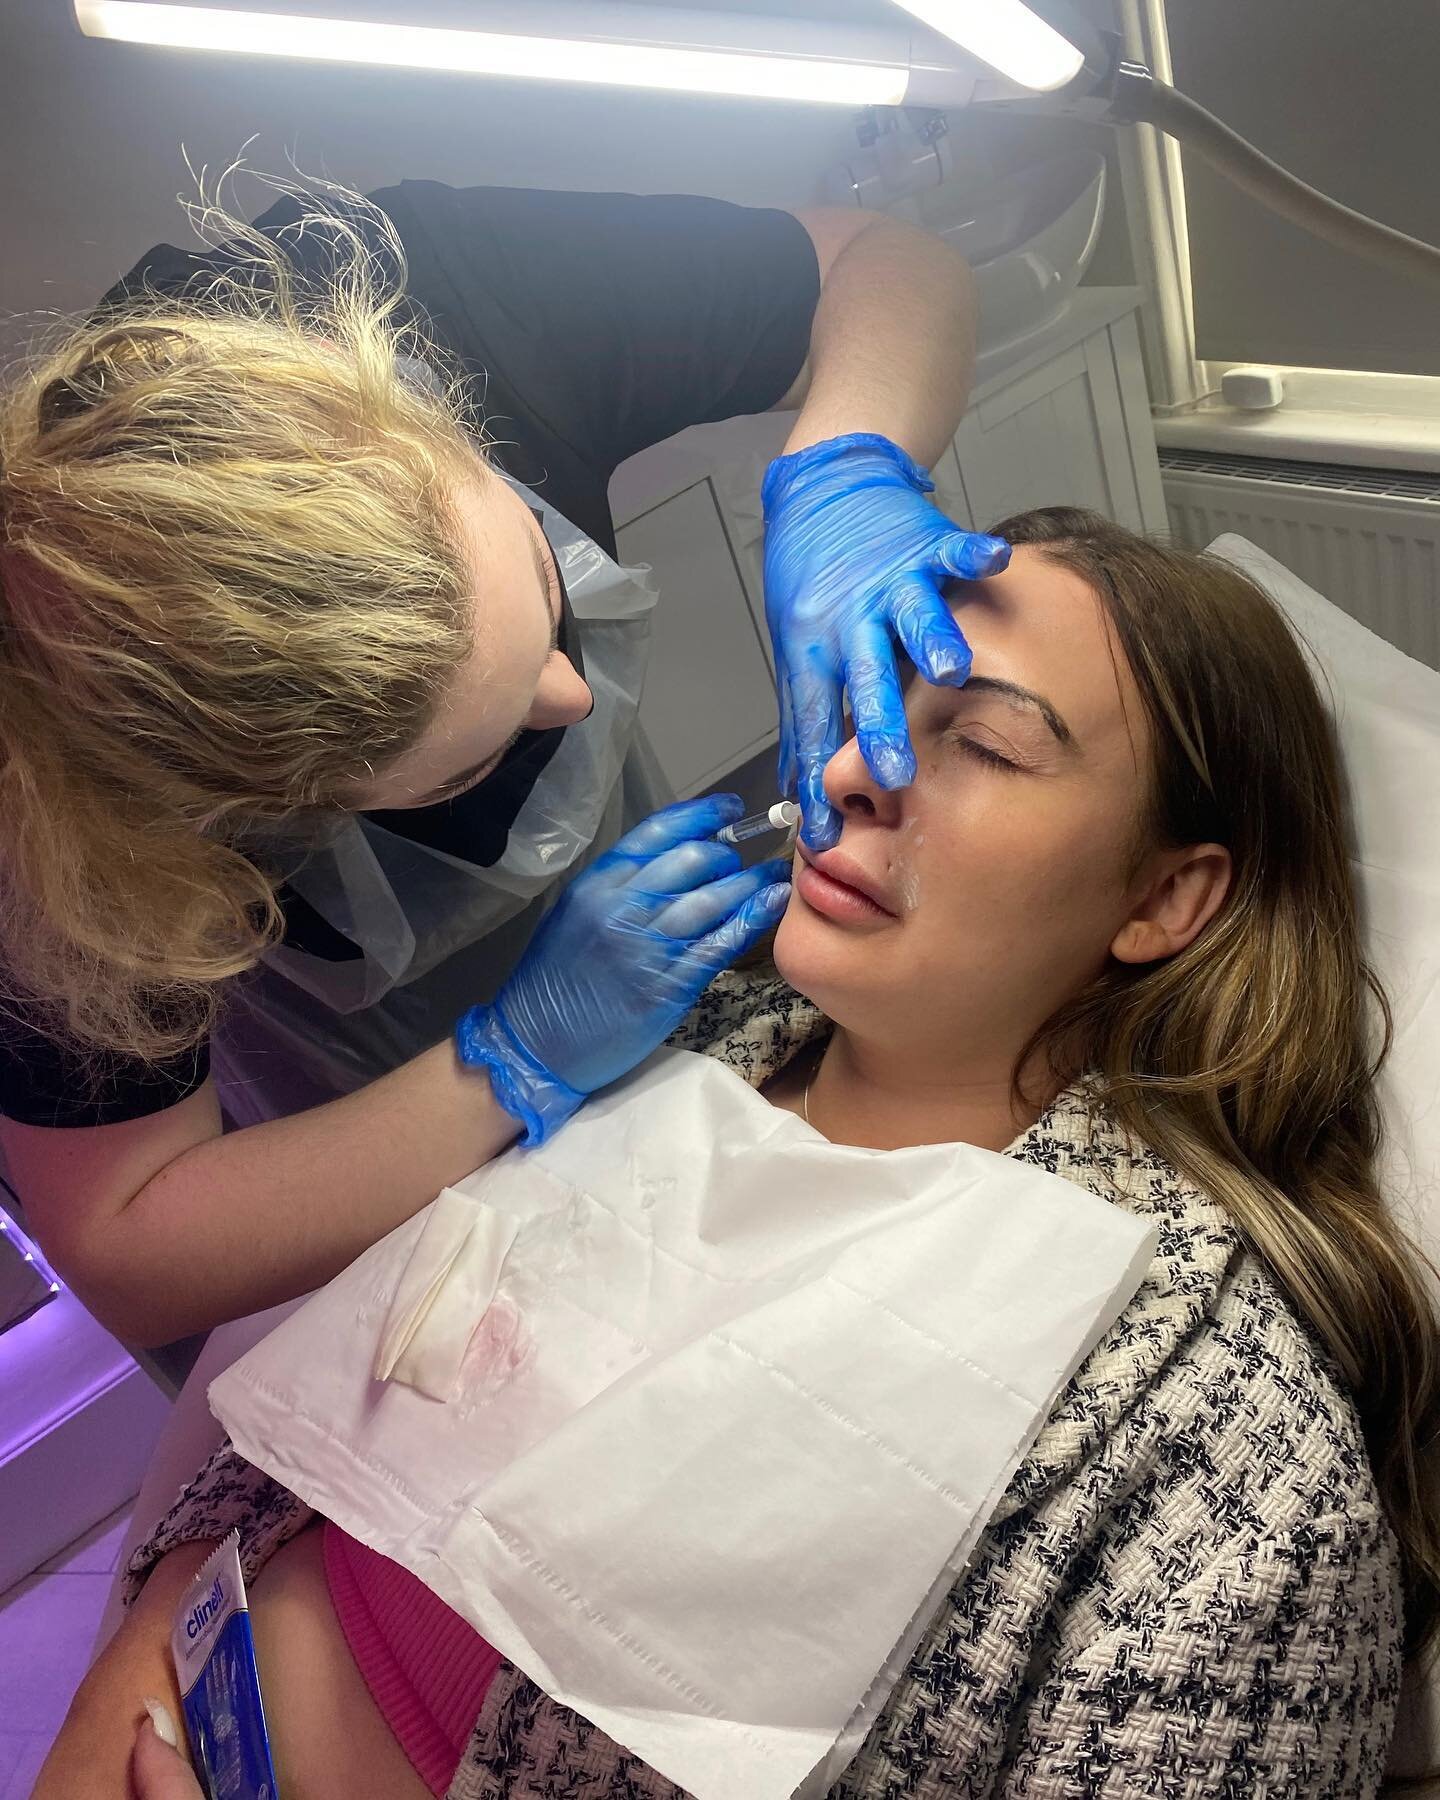 Did you know that all our filler has added Lidocaine, a numbing agent? I totally get it - needles can be scary and the idea of the pain during the treatment can be off putting. But, we&rsquo;ll start you off with some numbing cream, followed by the t